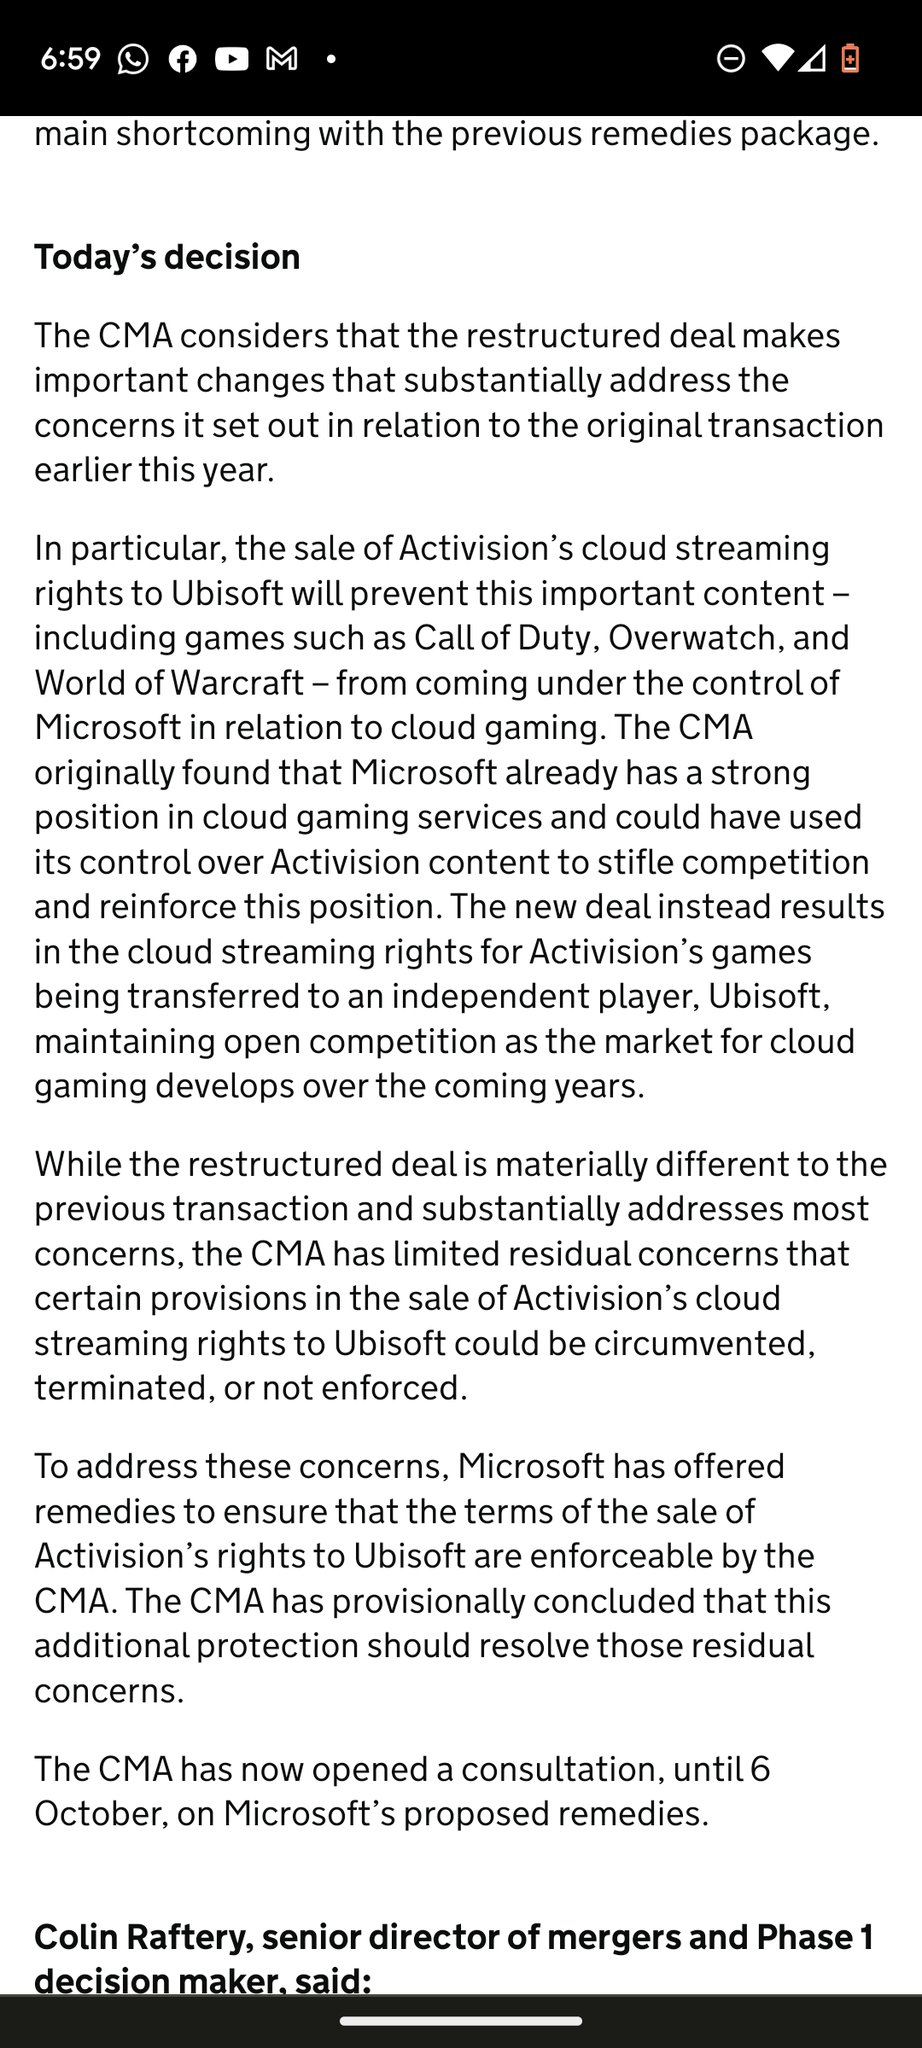 Microsoft And Activision In Talks With UK's CMA To Address